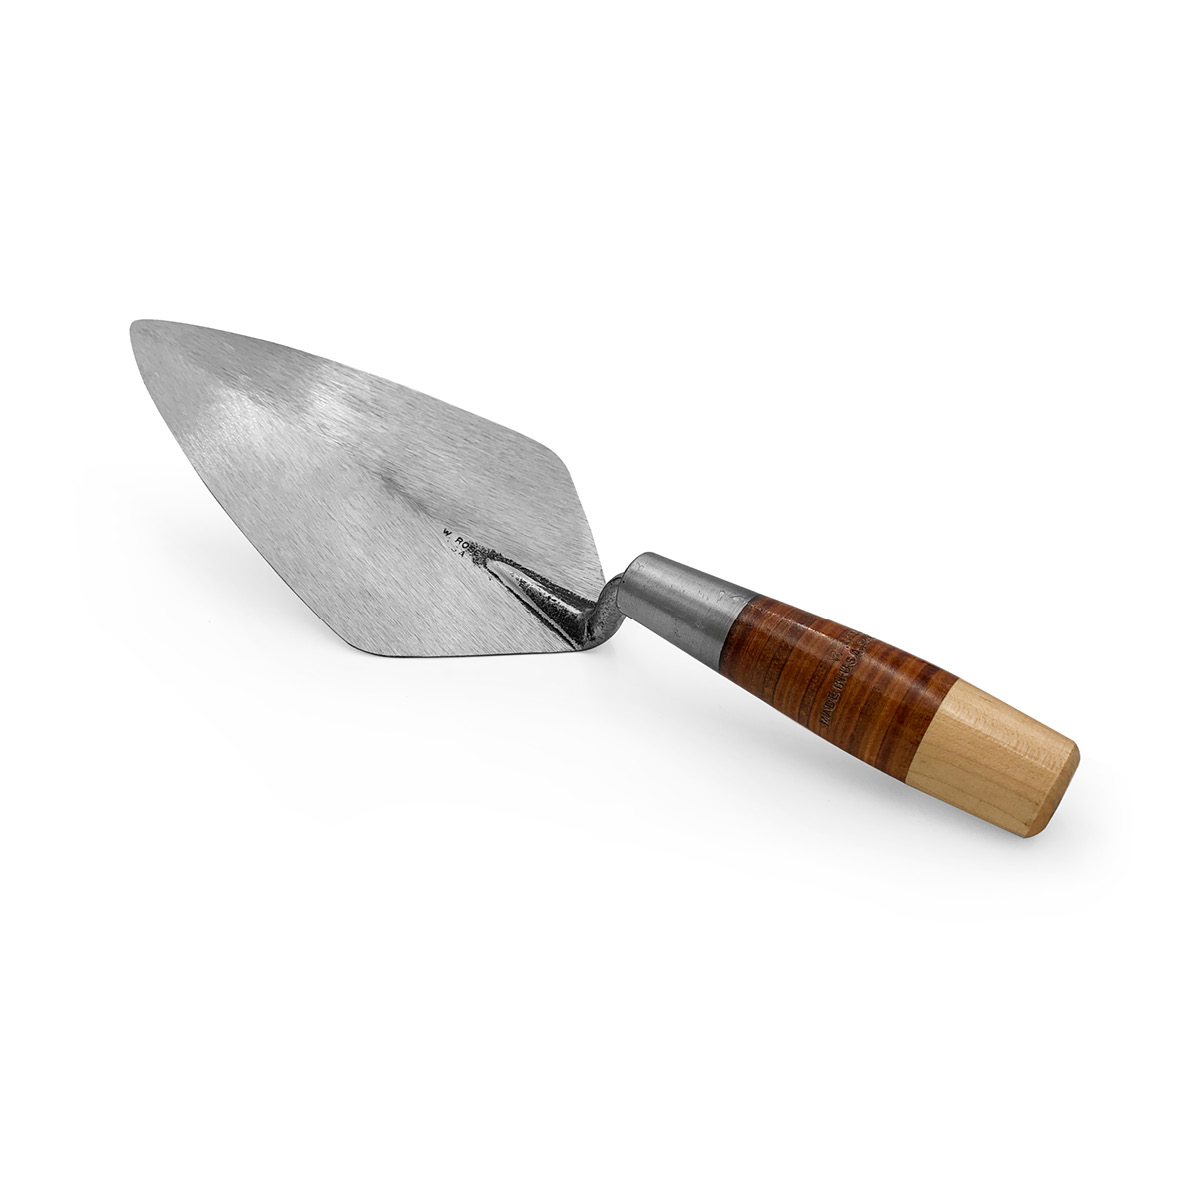 W.rose Trowels made from a single piece of specially forged steel for extra strength. These American made trowels can be purchased in the United Kingdom via Speedcrete who sell masonry professional tools. Leather handle brick trowel.